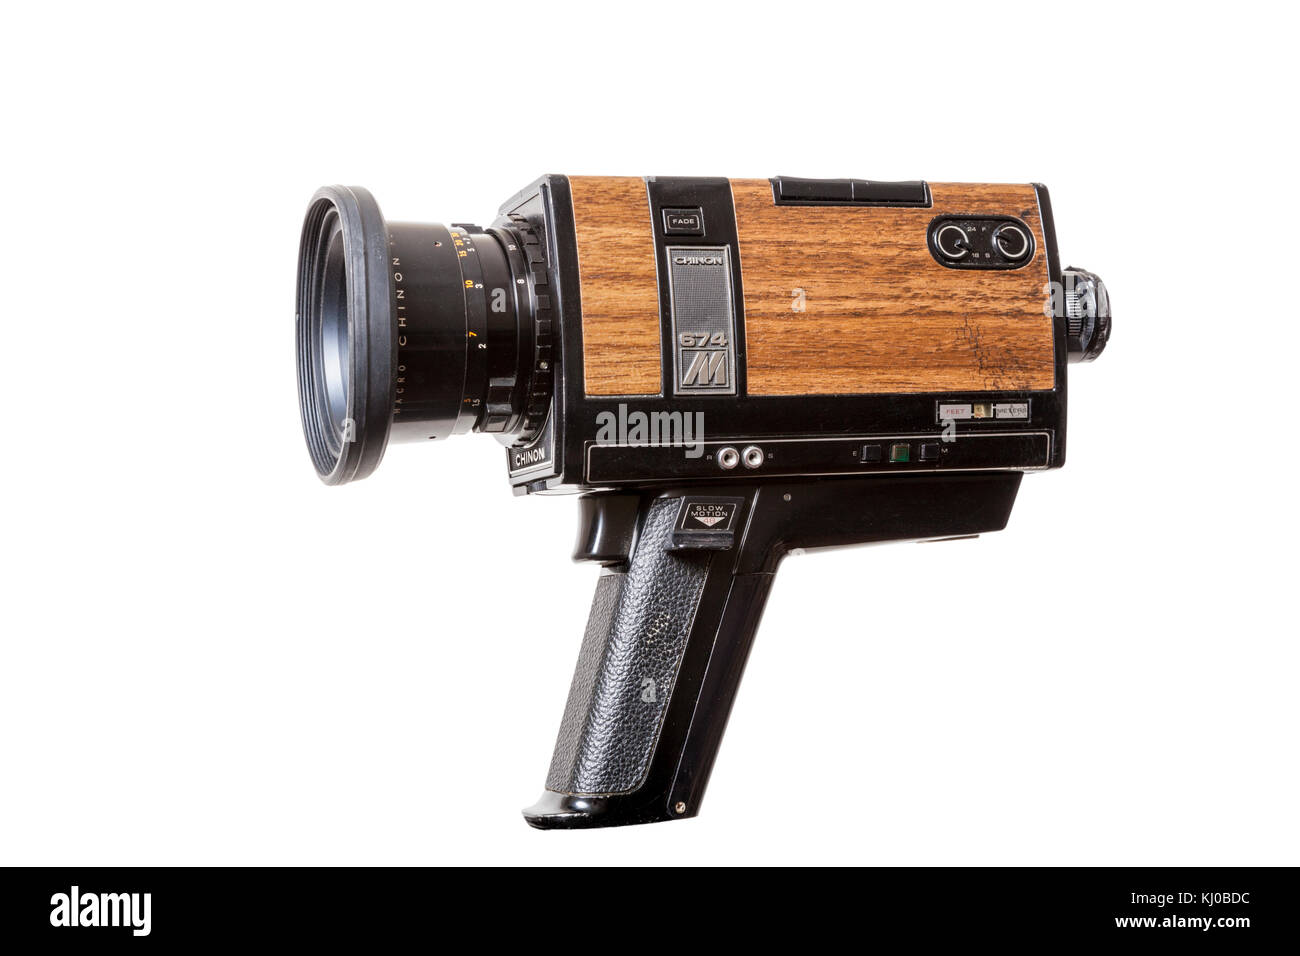 1970s cine camera sold by Dixons. Chinon 674 macro power zoom synchro sound Super 8 movie camera. On a white background. Stock Photo